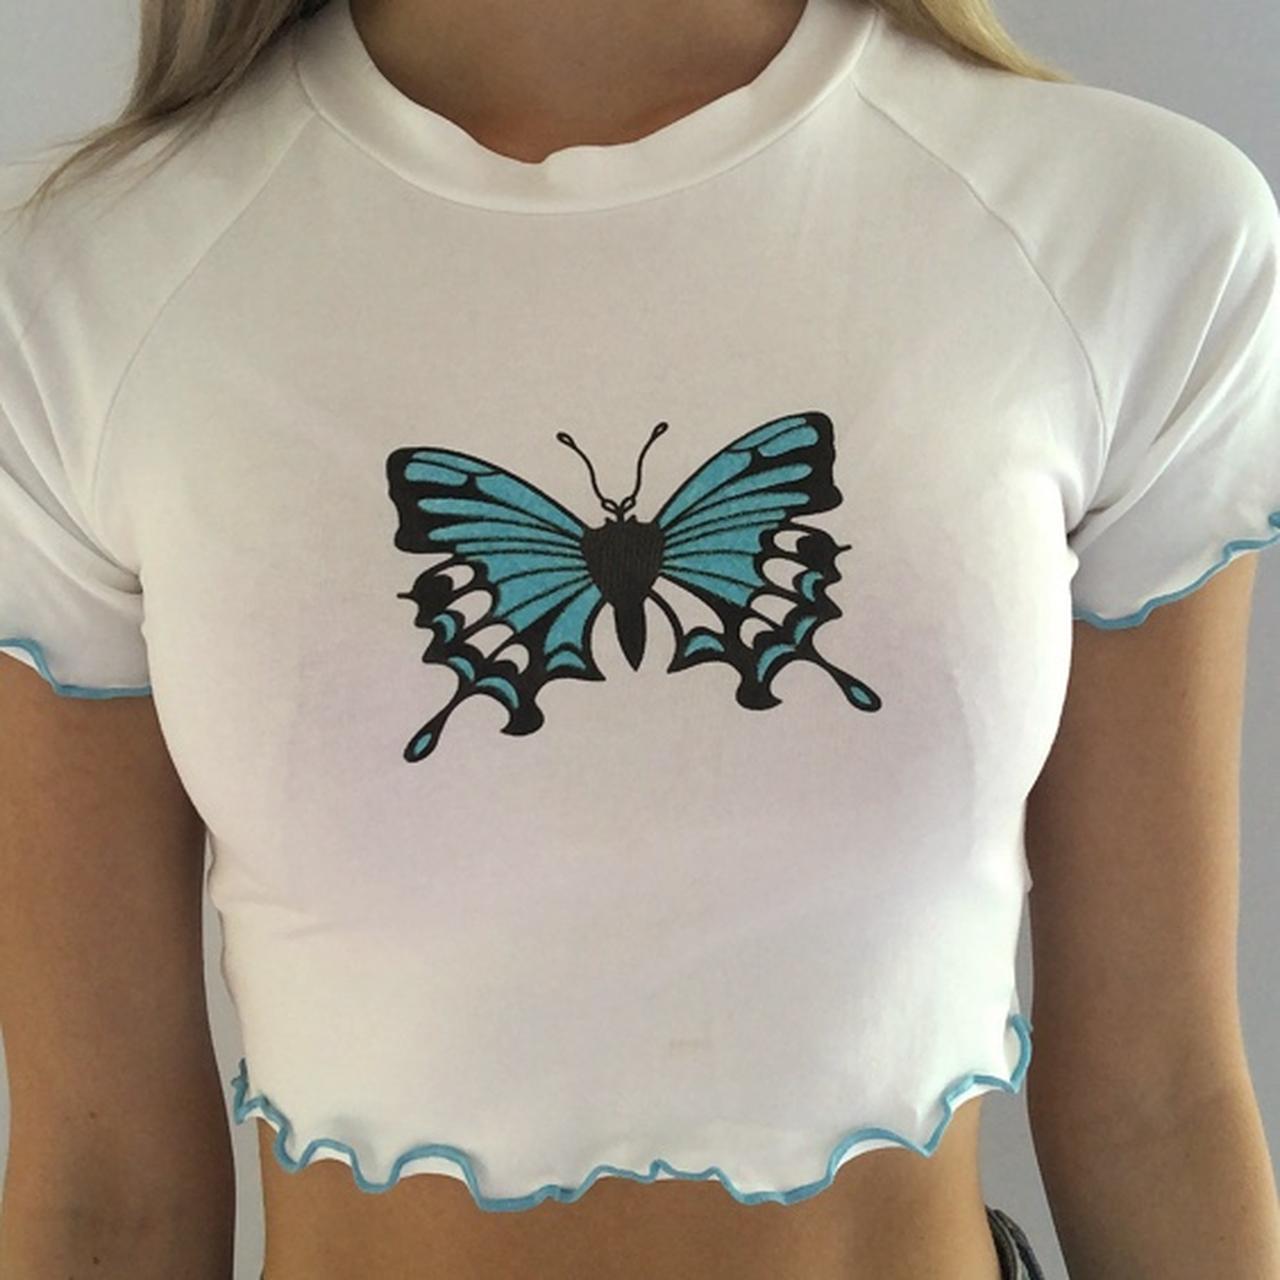 🦋 Butterfly Crop top Shirt - Baby Blue's Code & Price - RblxTrade